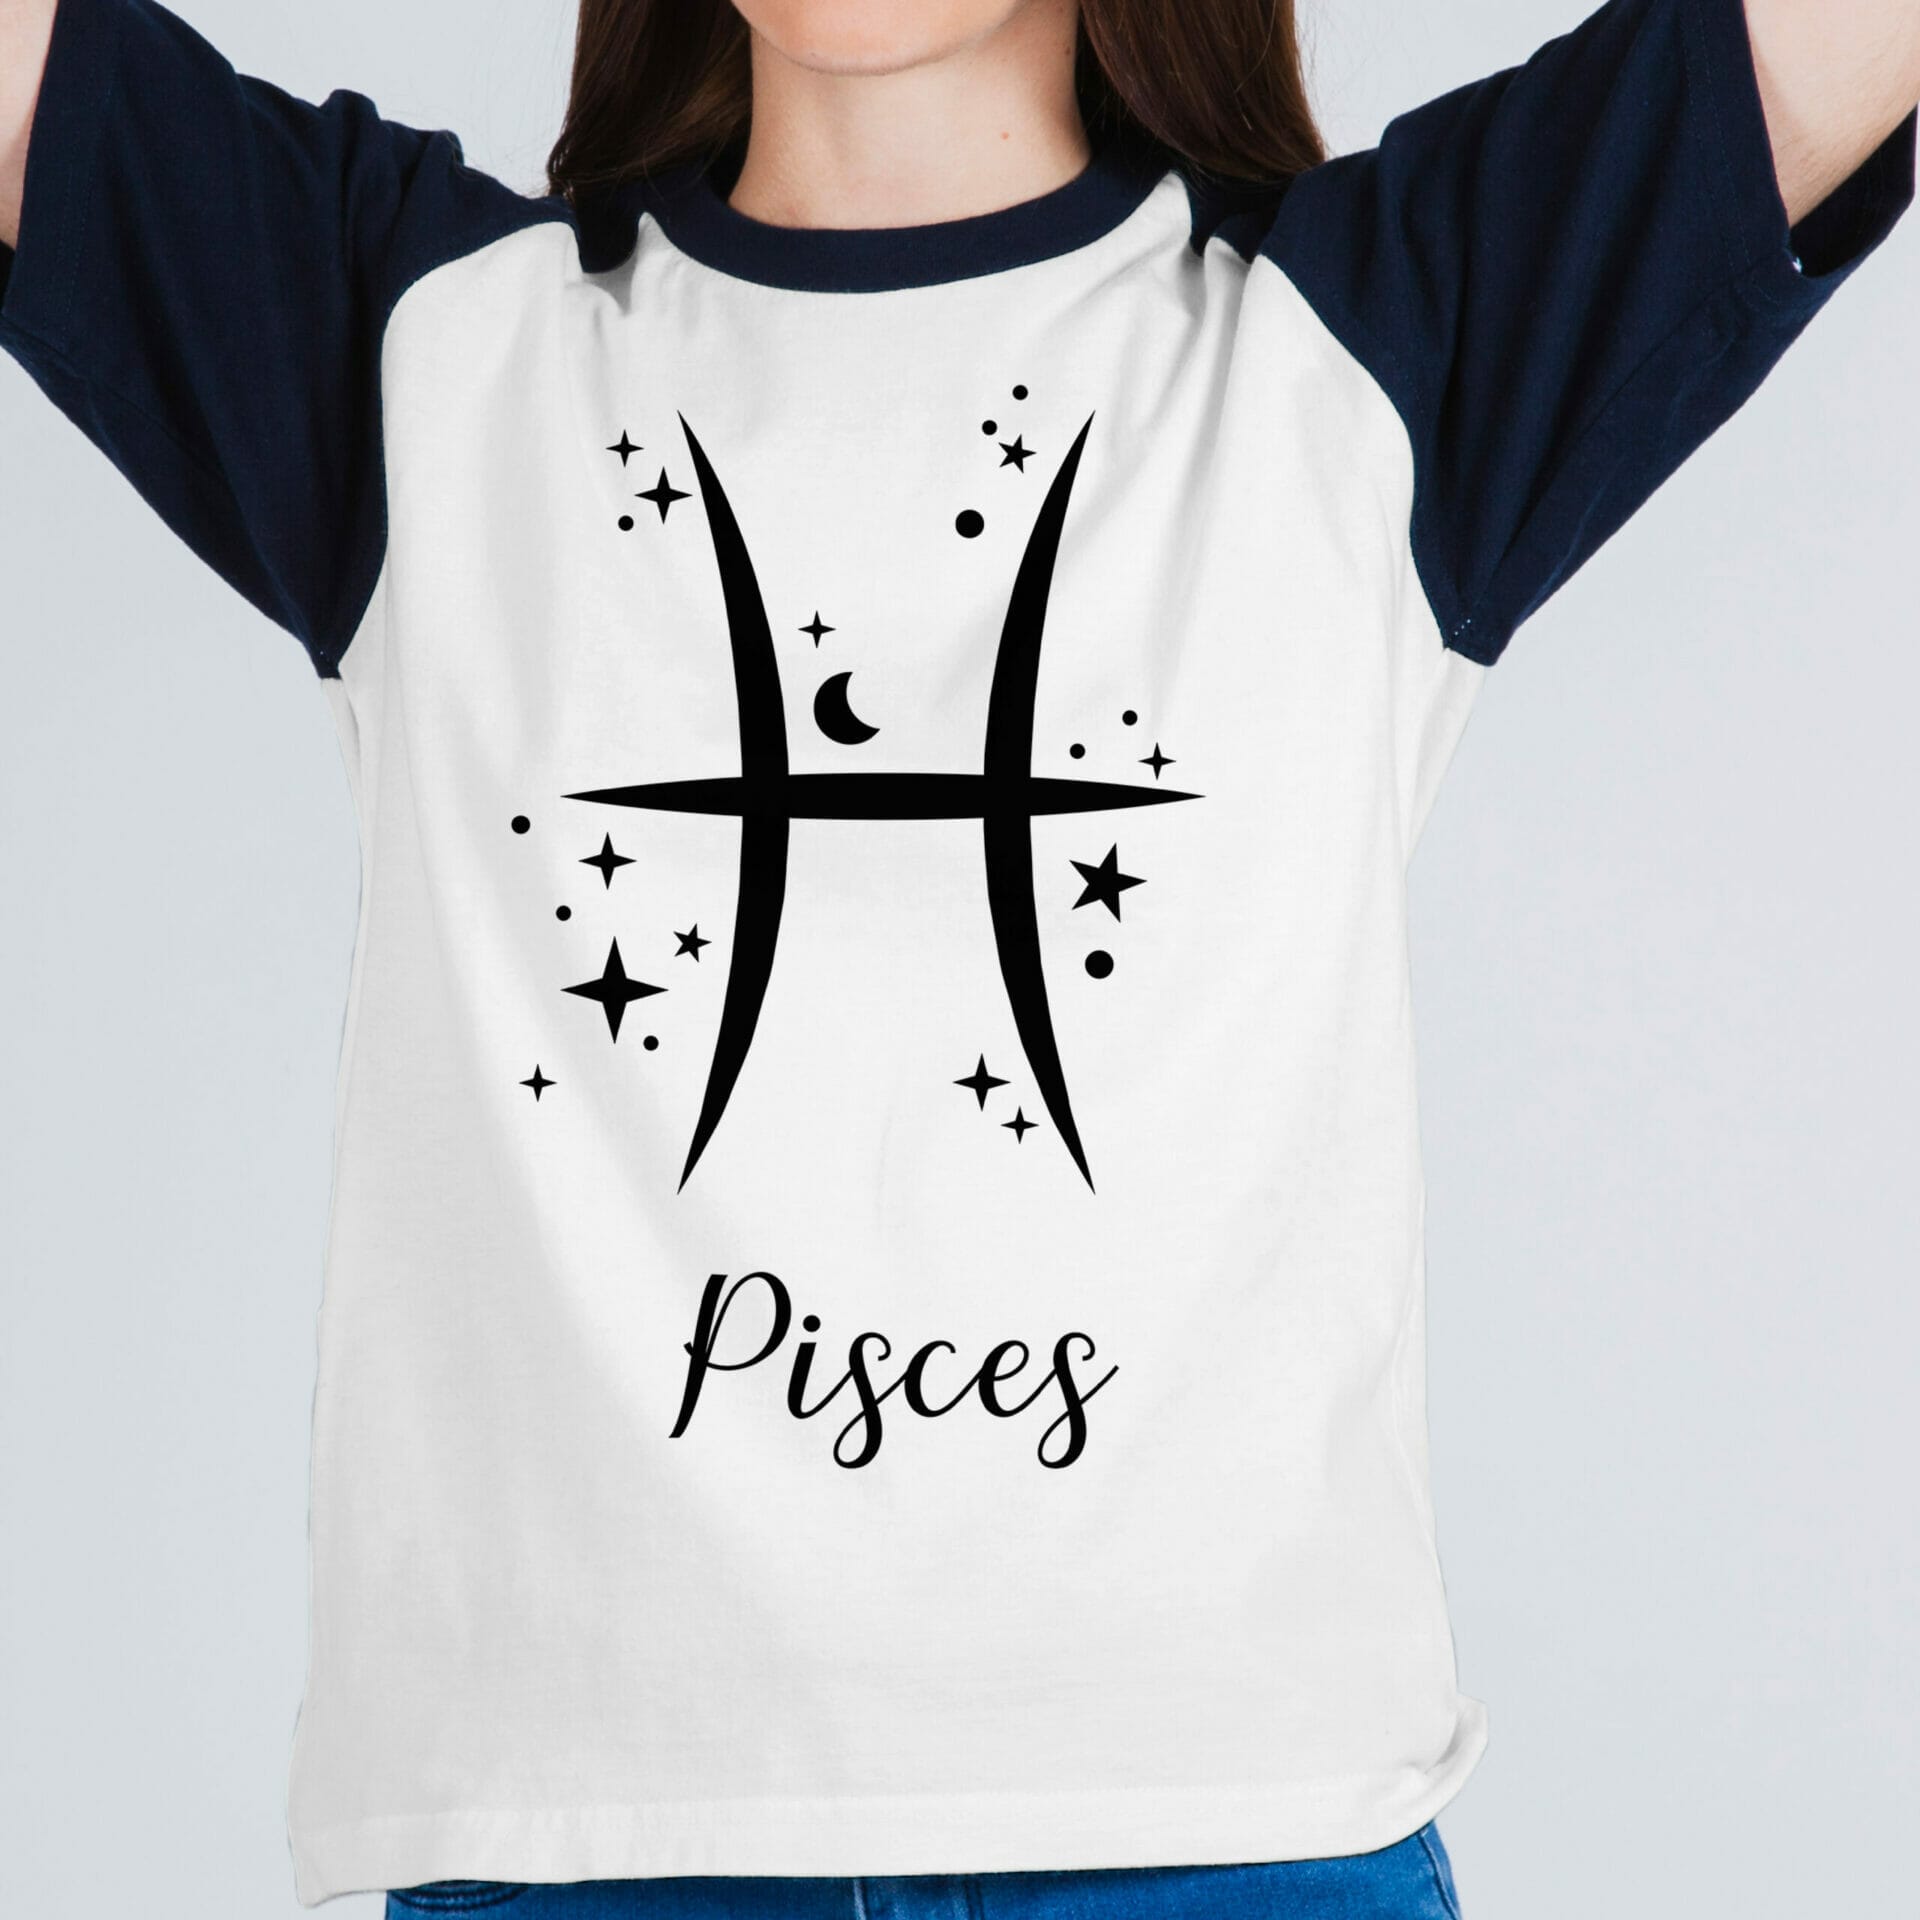 Pisces Horoscope with stars T shirt design | For Free